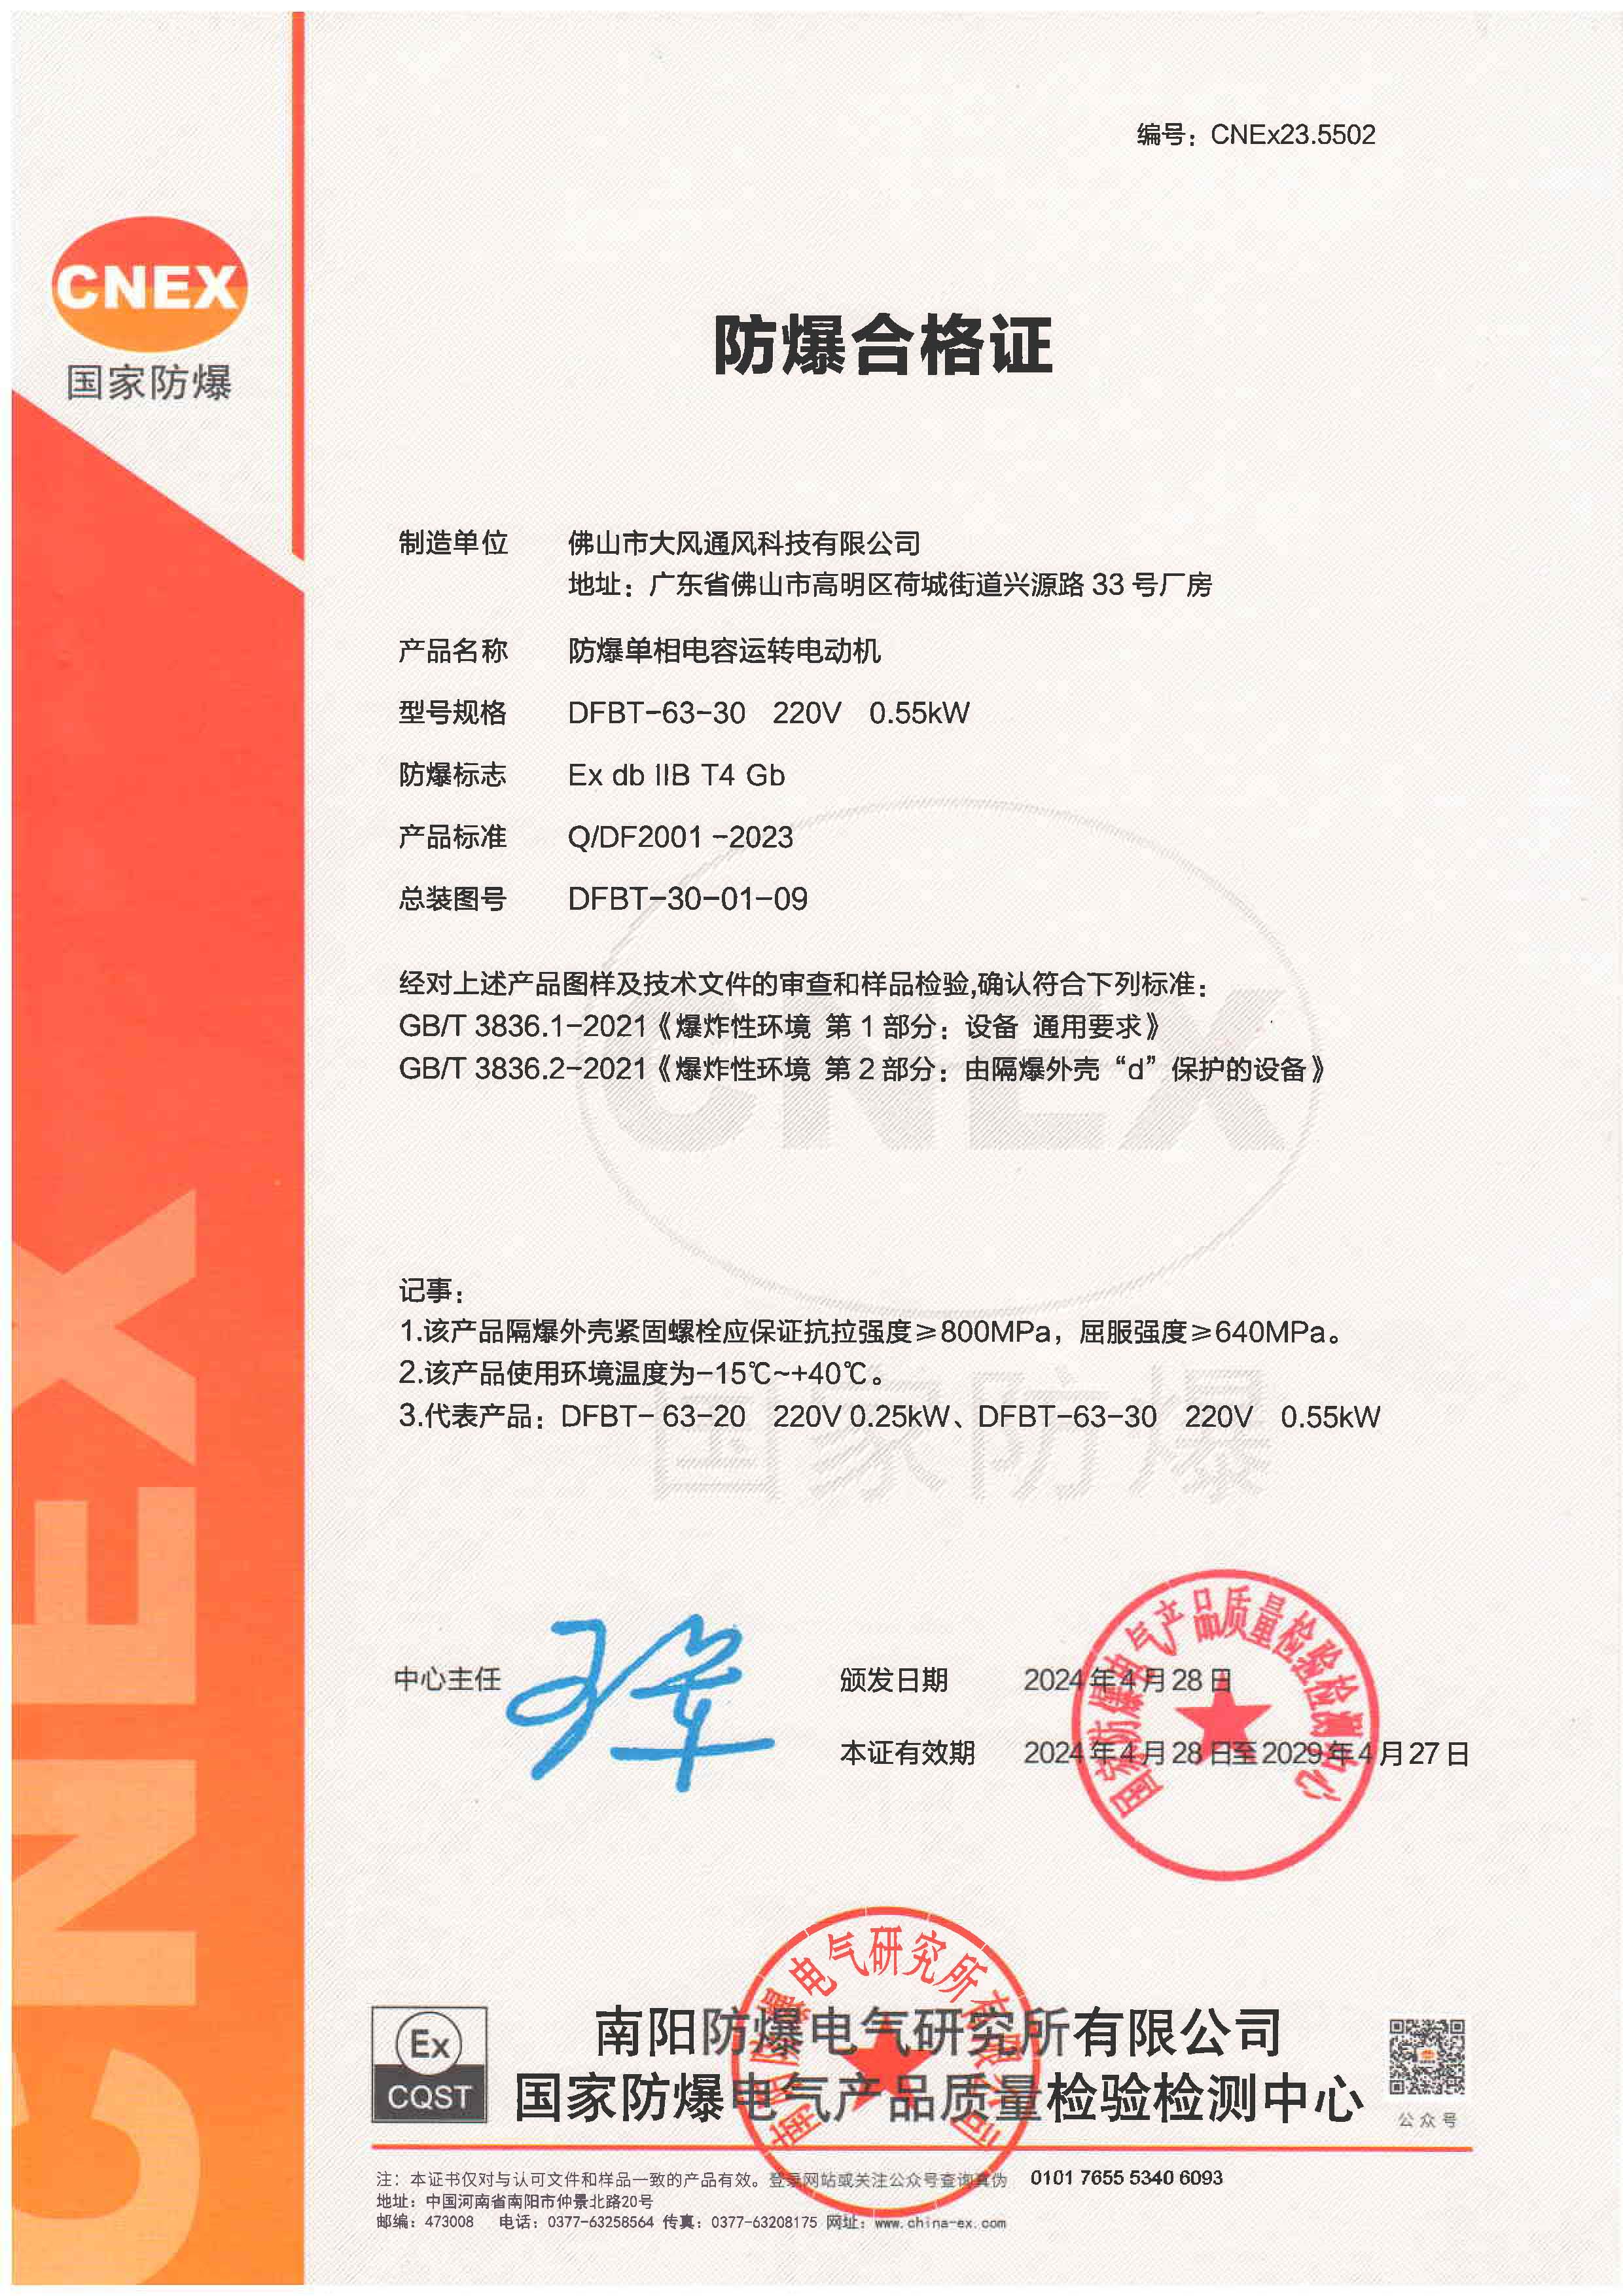 Congratulations to DAFENG for Explosion proof certificate:Explosion-proof single-phase capacitor running motor